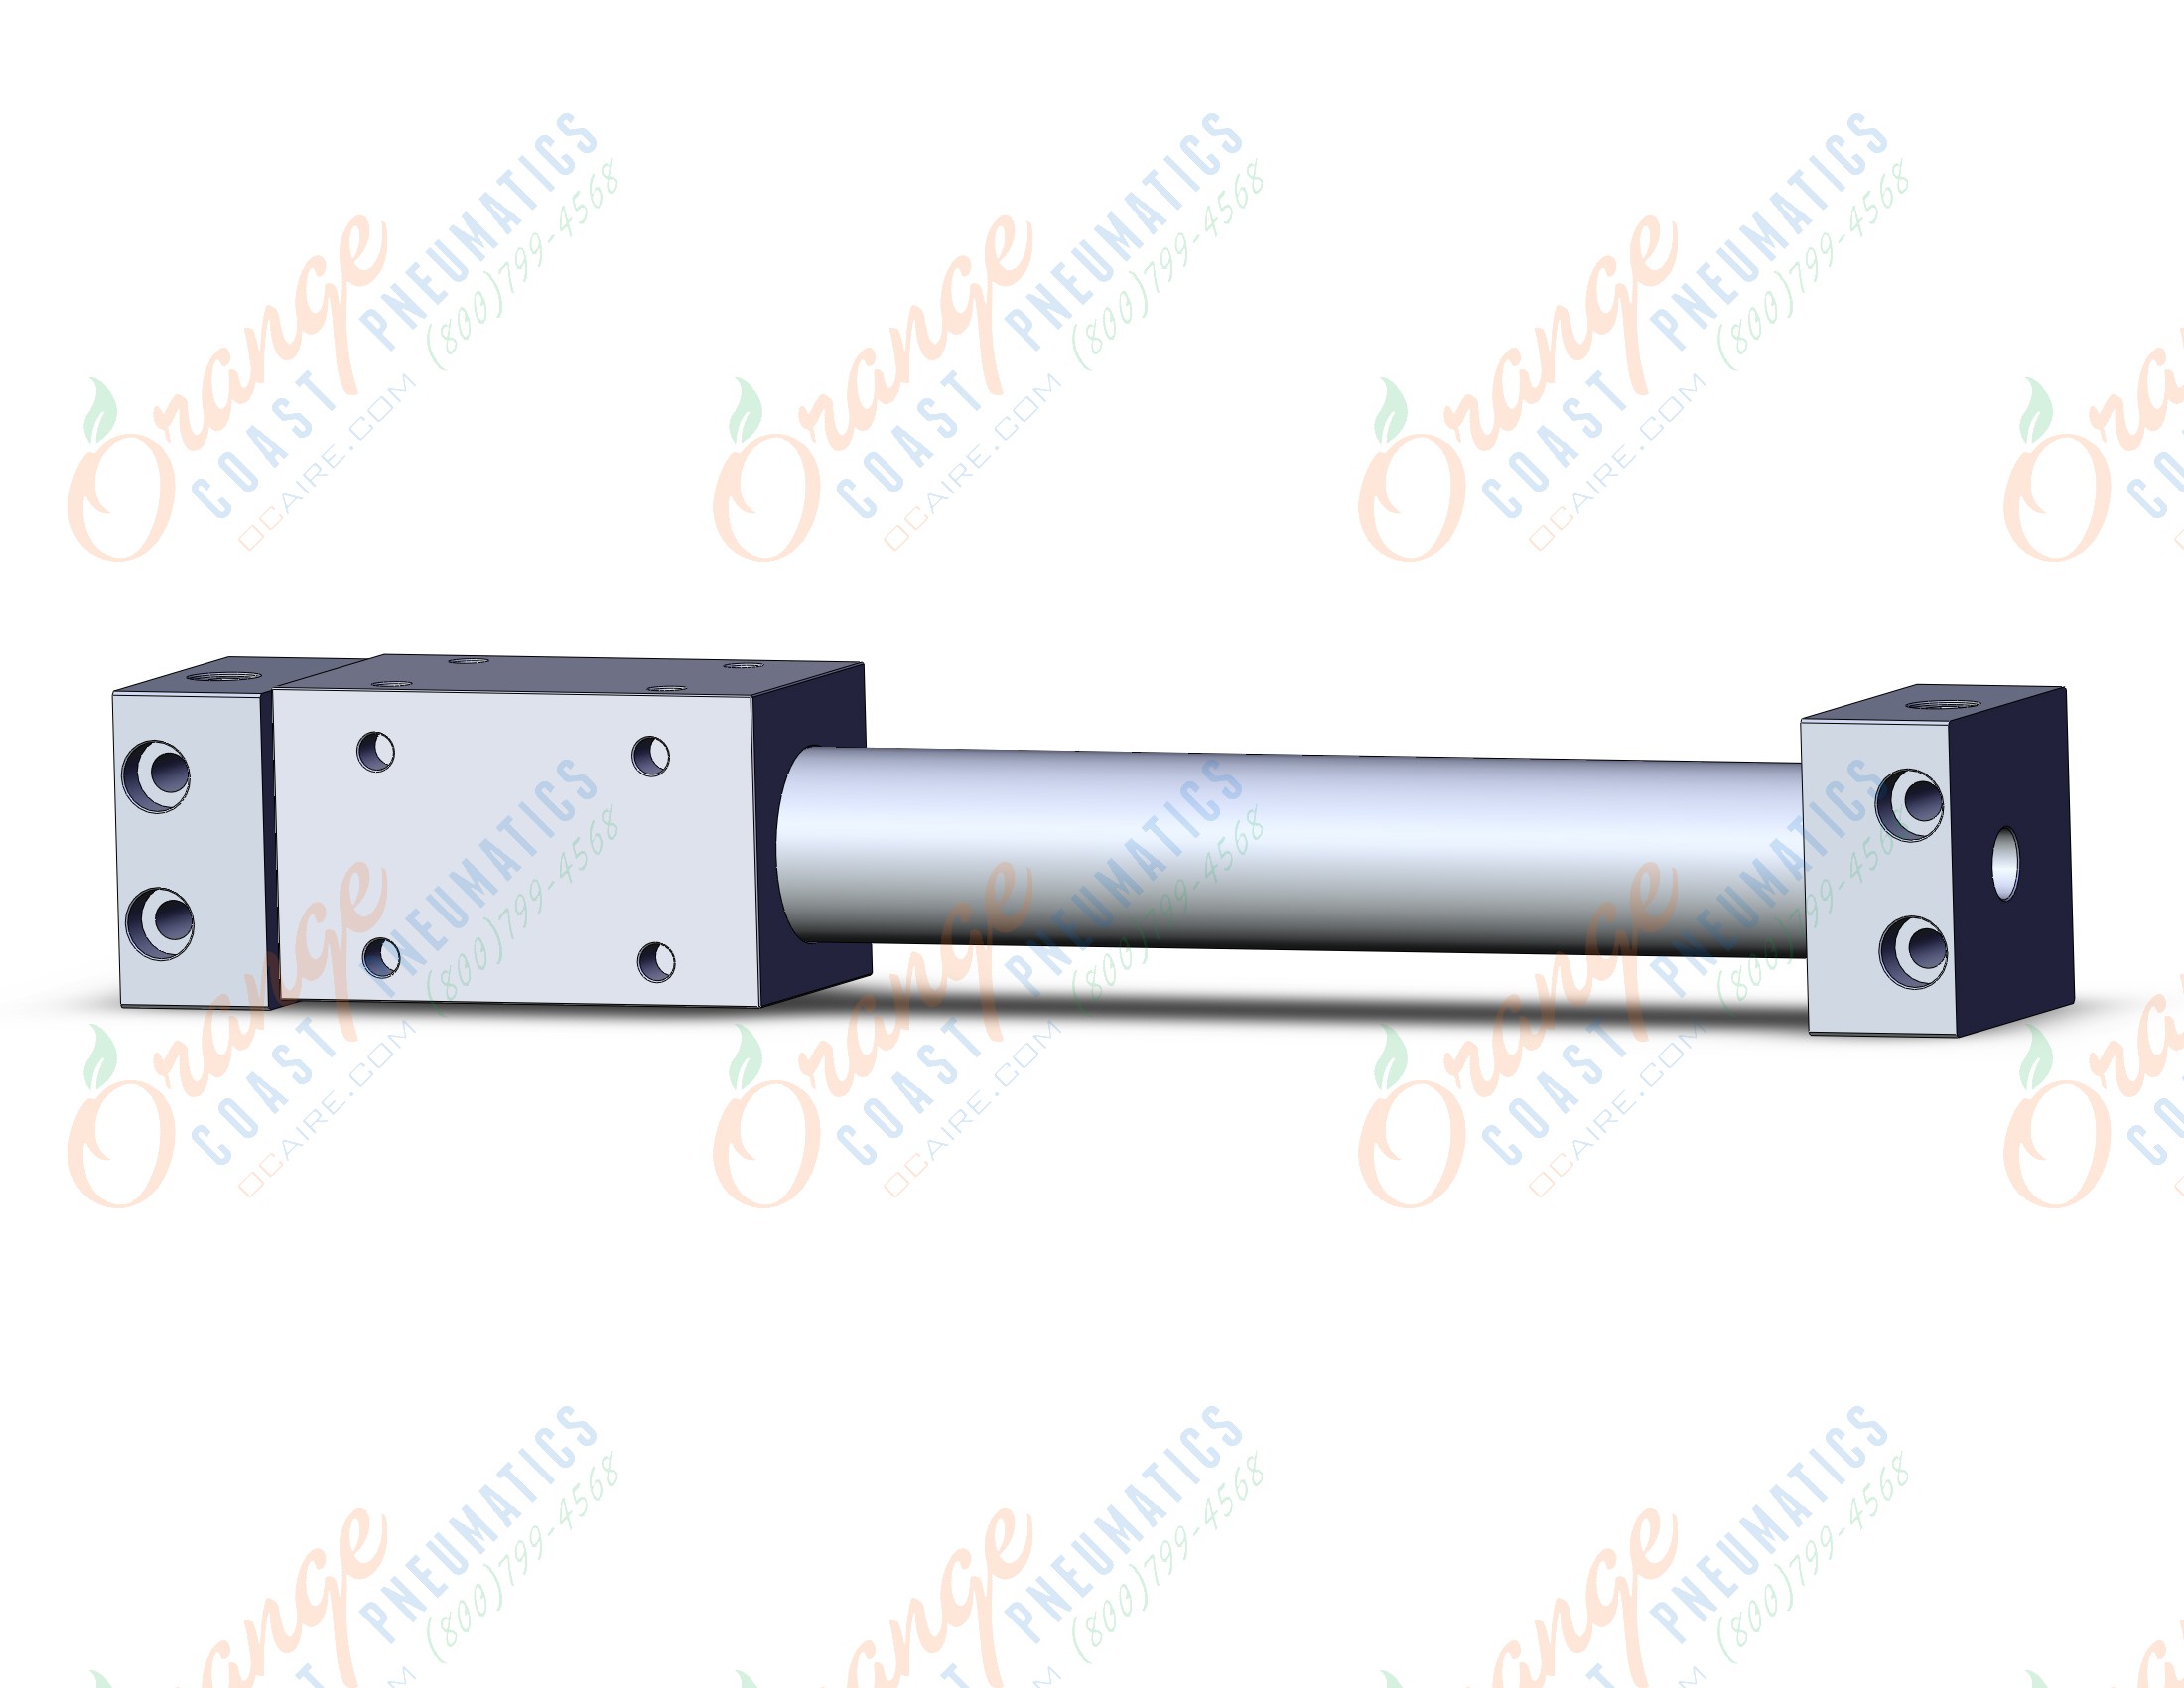 SMC CY3R25-150N cy3, magnet coupled rodless cylinder, RODLESS CYLINDER